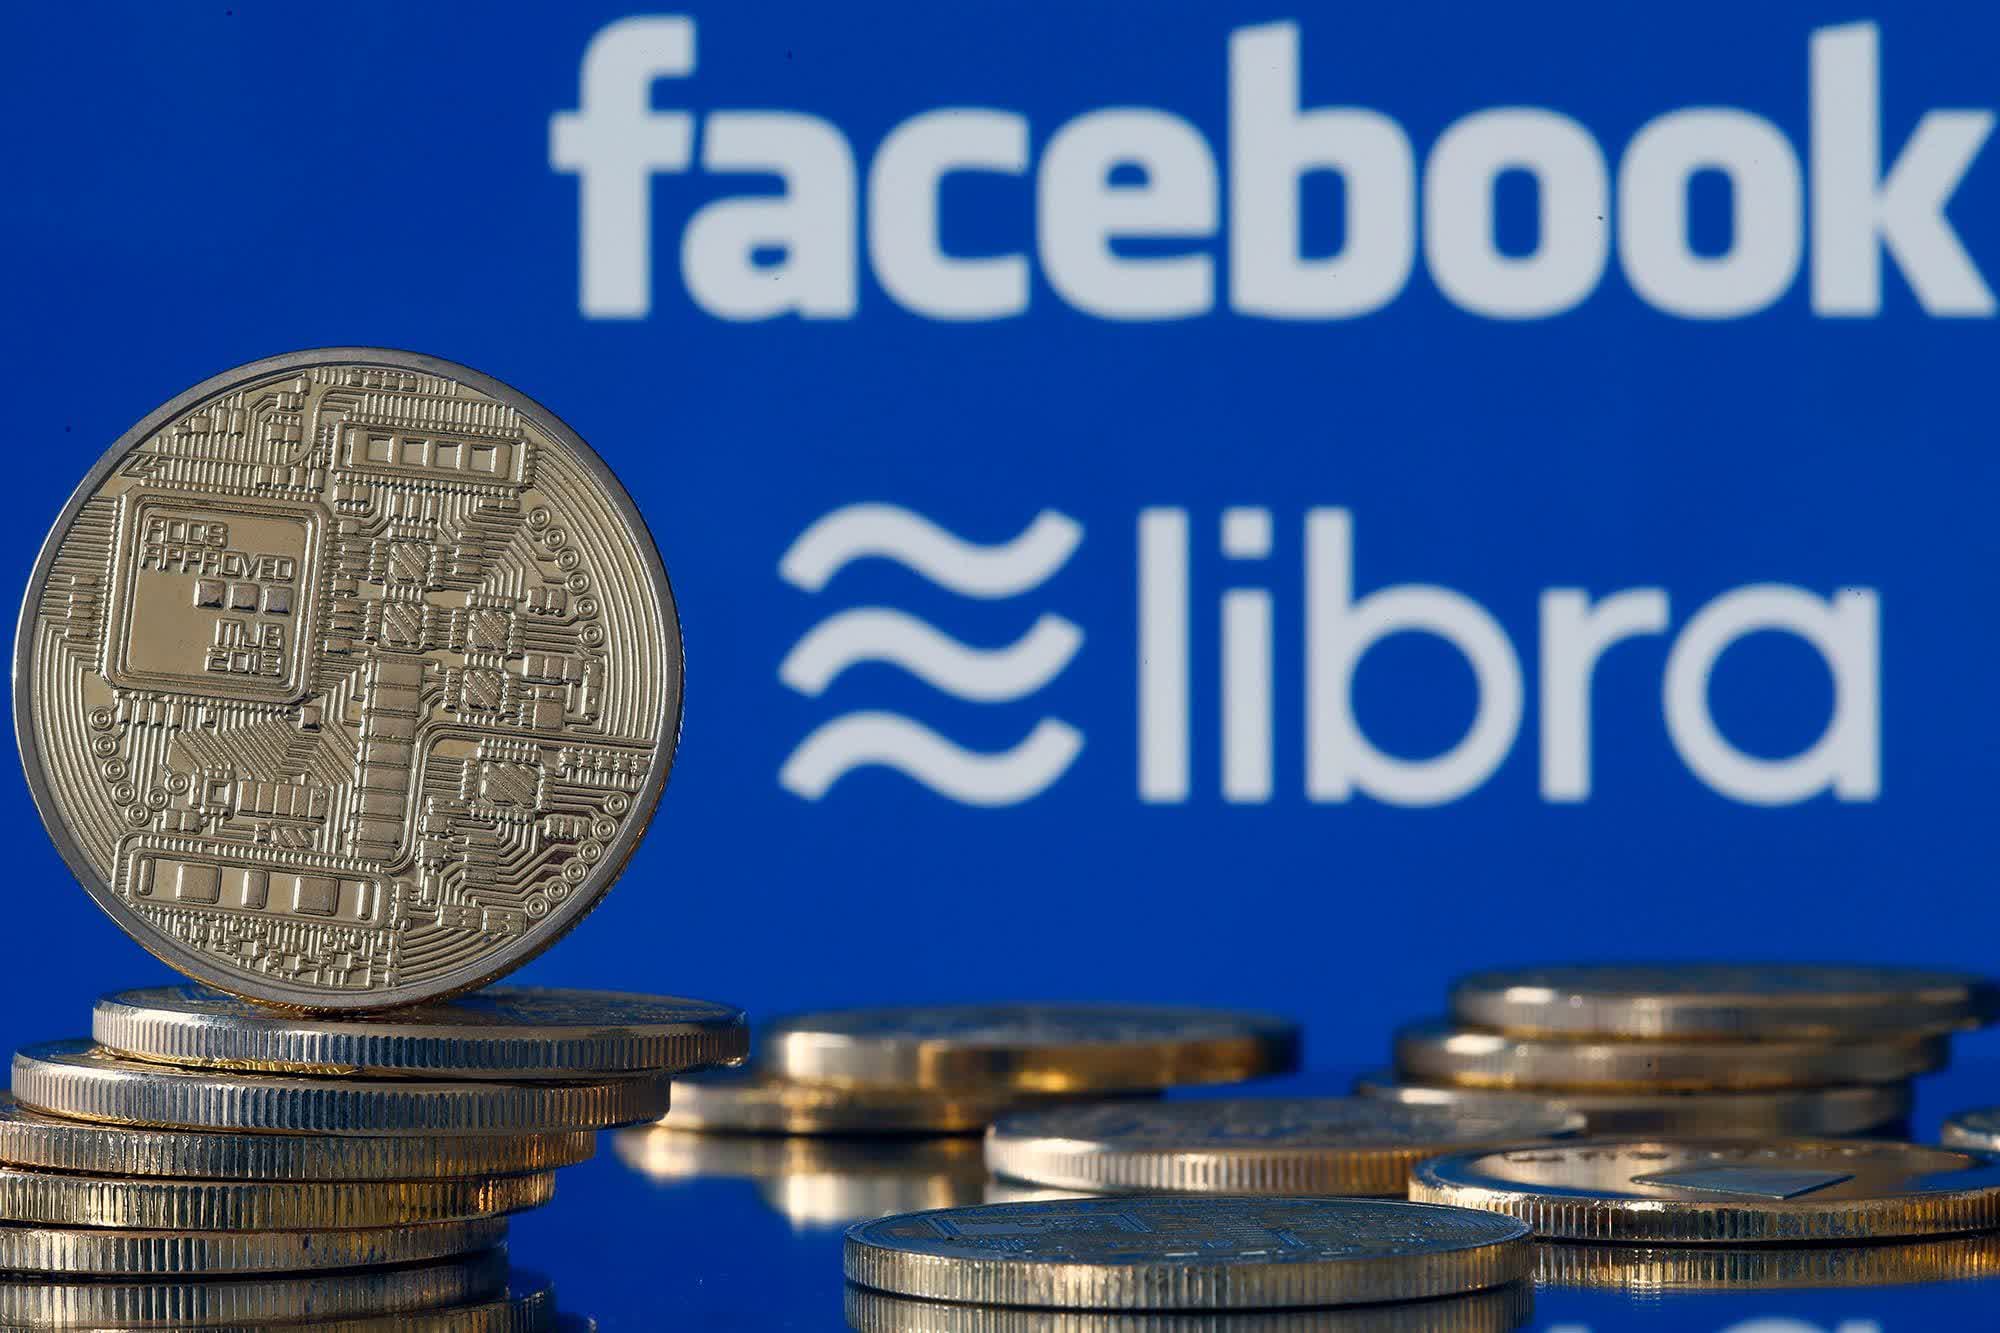 Facebook's Libra crypto project, now called Diem, has been sold off